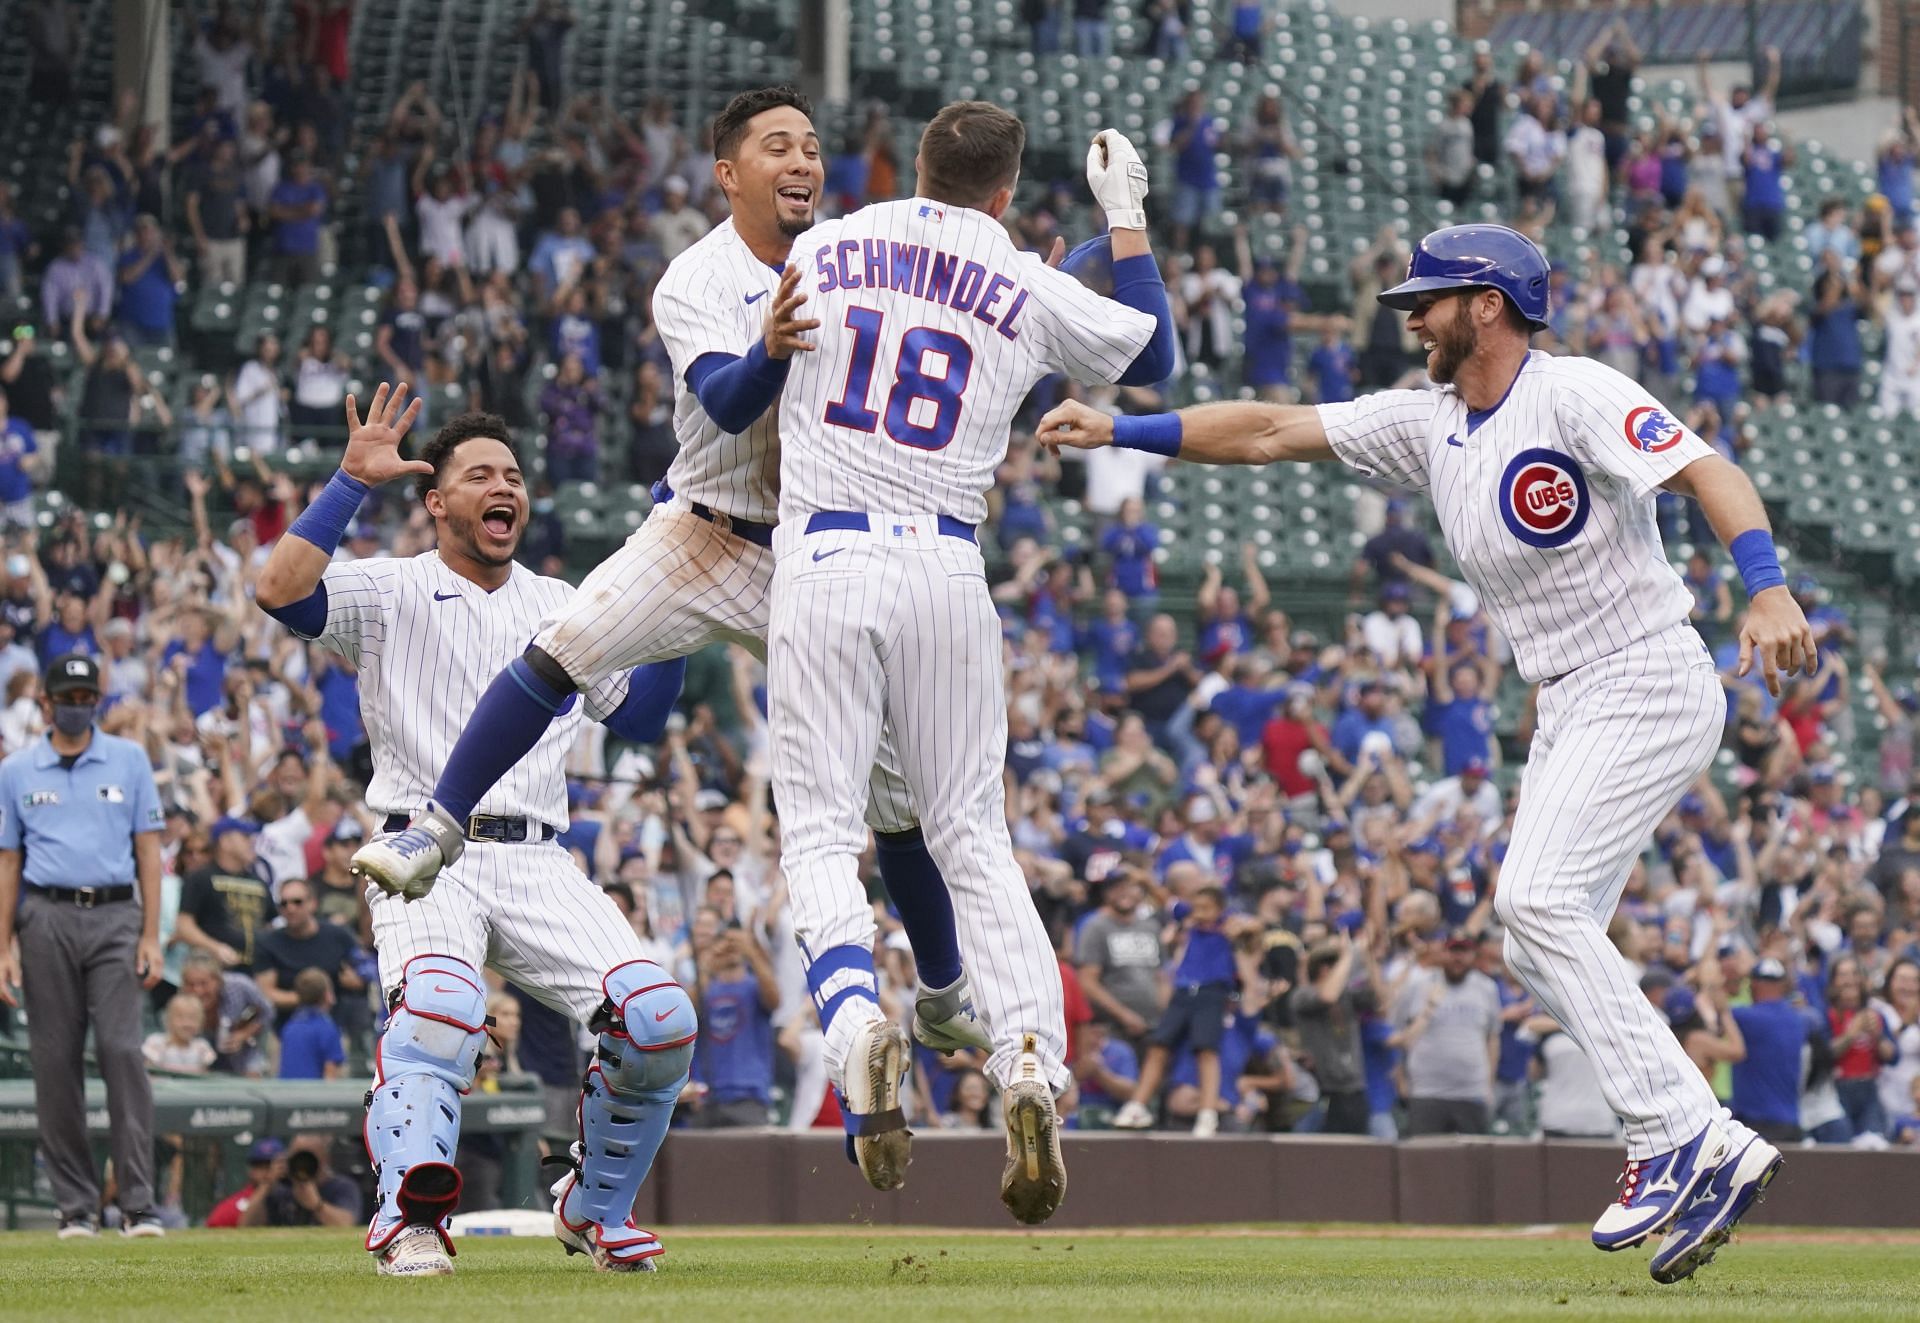 Chicago Cubs 2022 Season Preview Projected Lineups, Rotation and 3